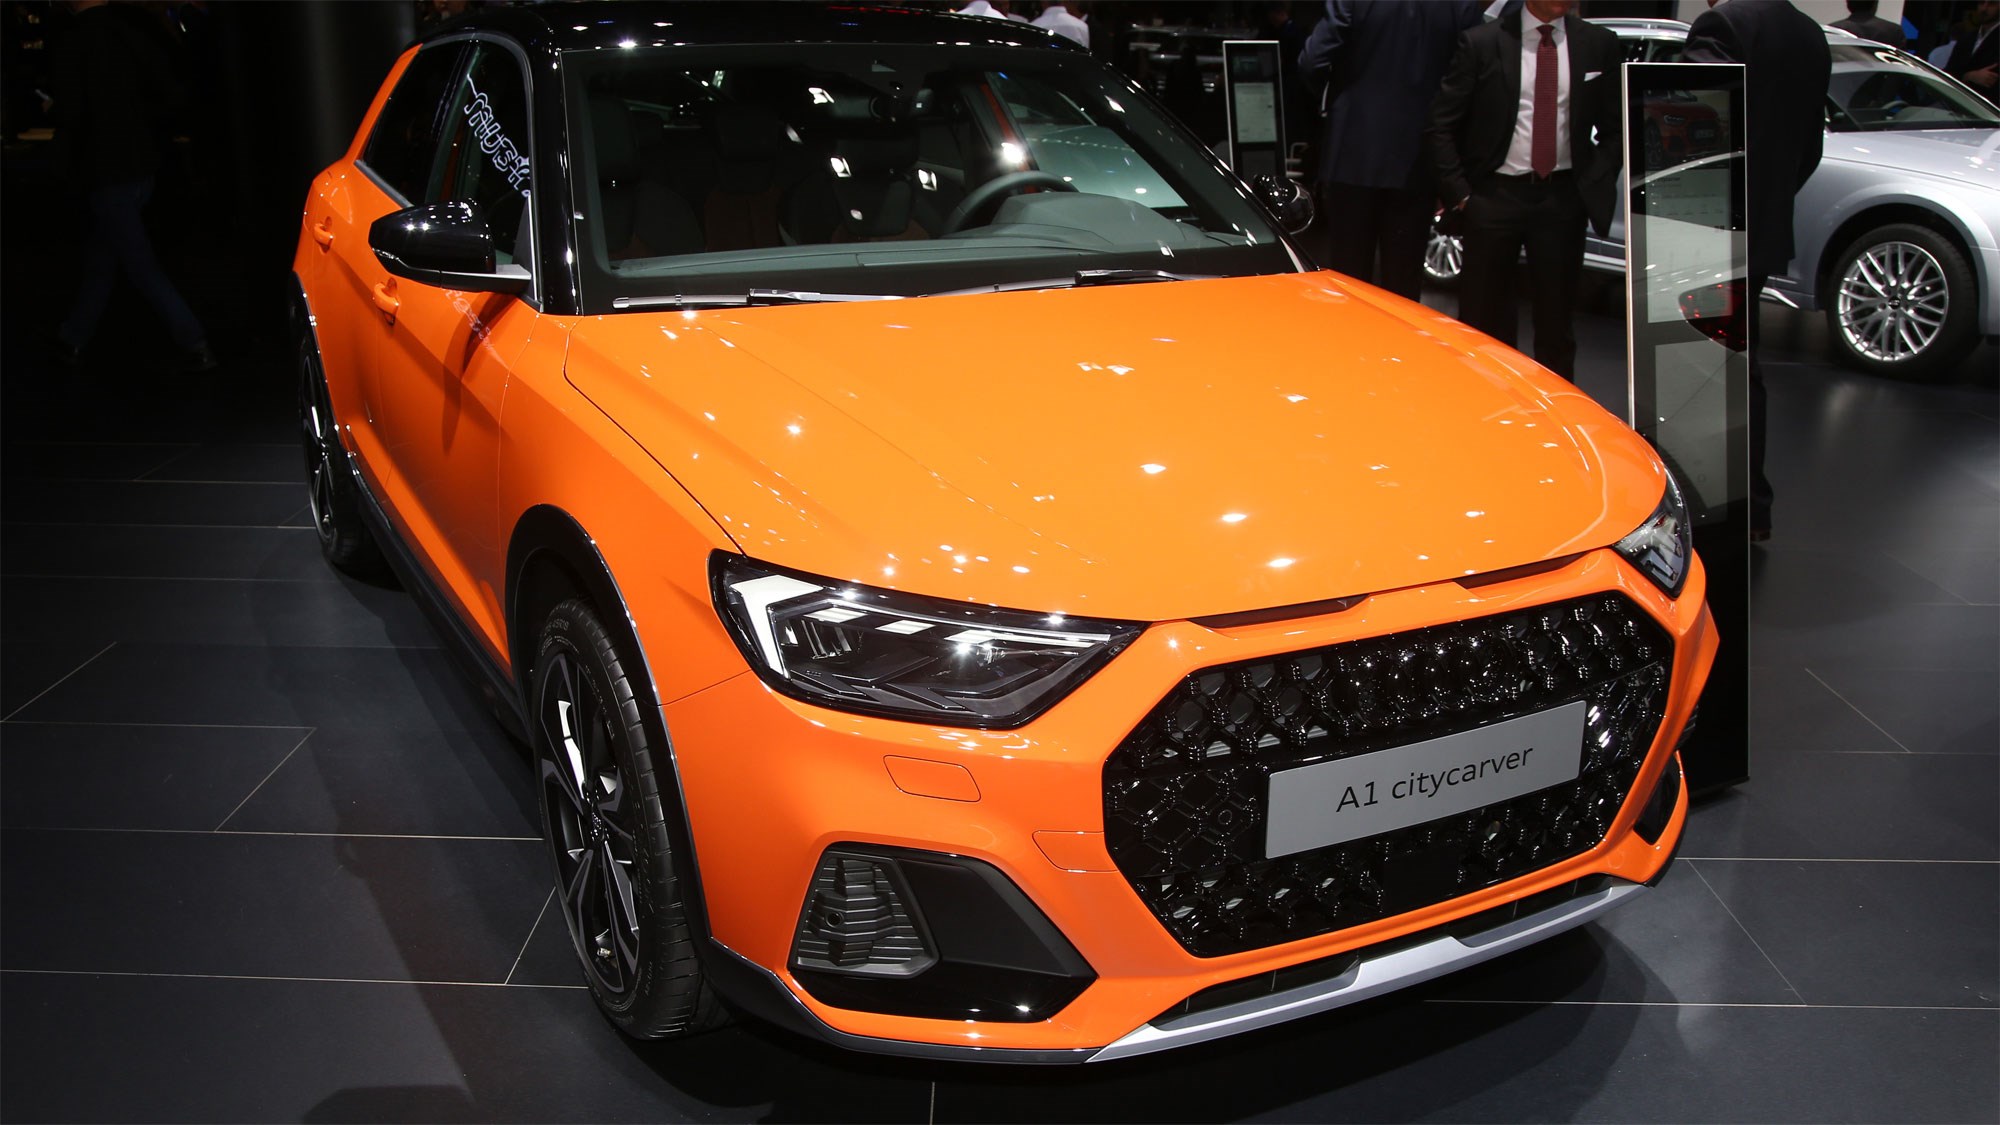 Audi A1 allstreet dimensions, boot space and similars